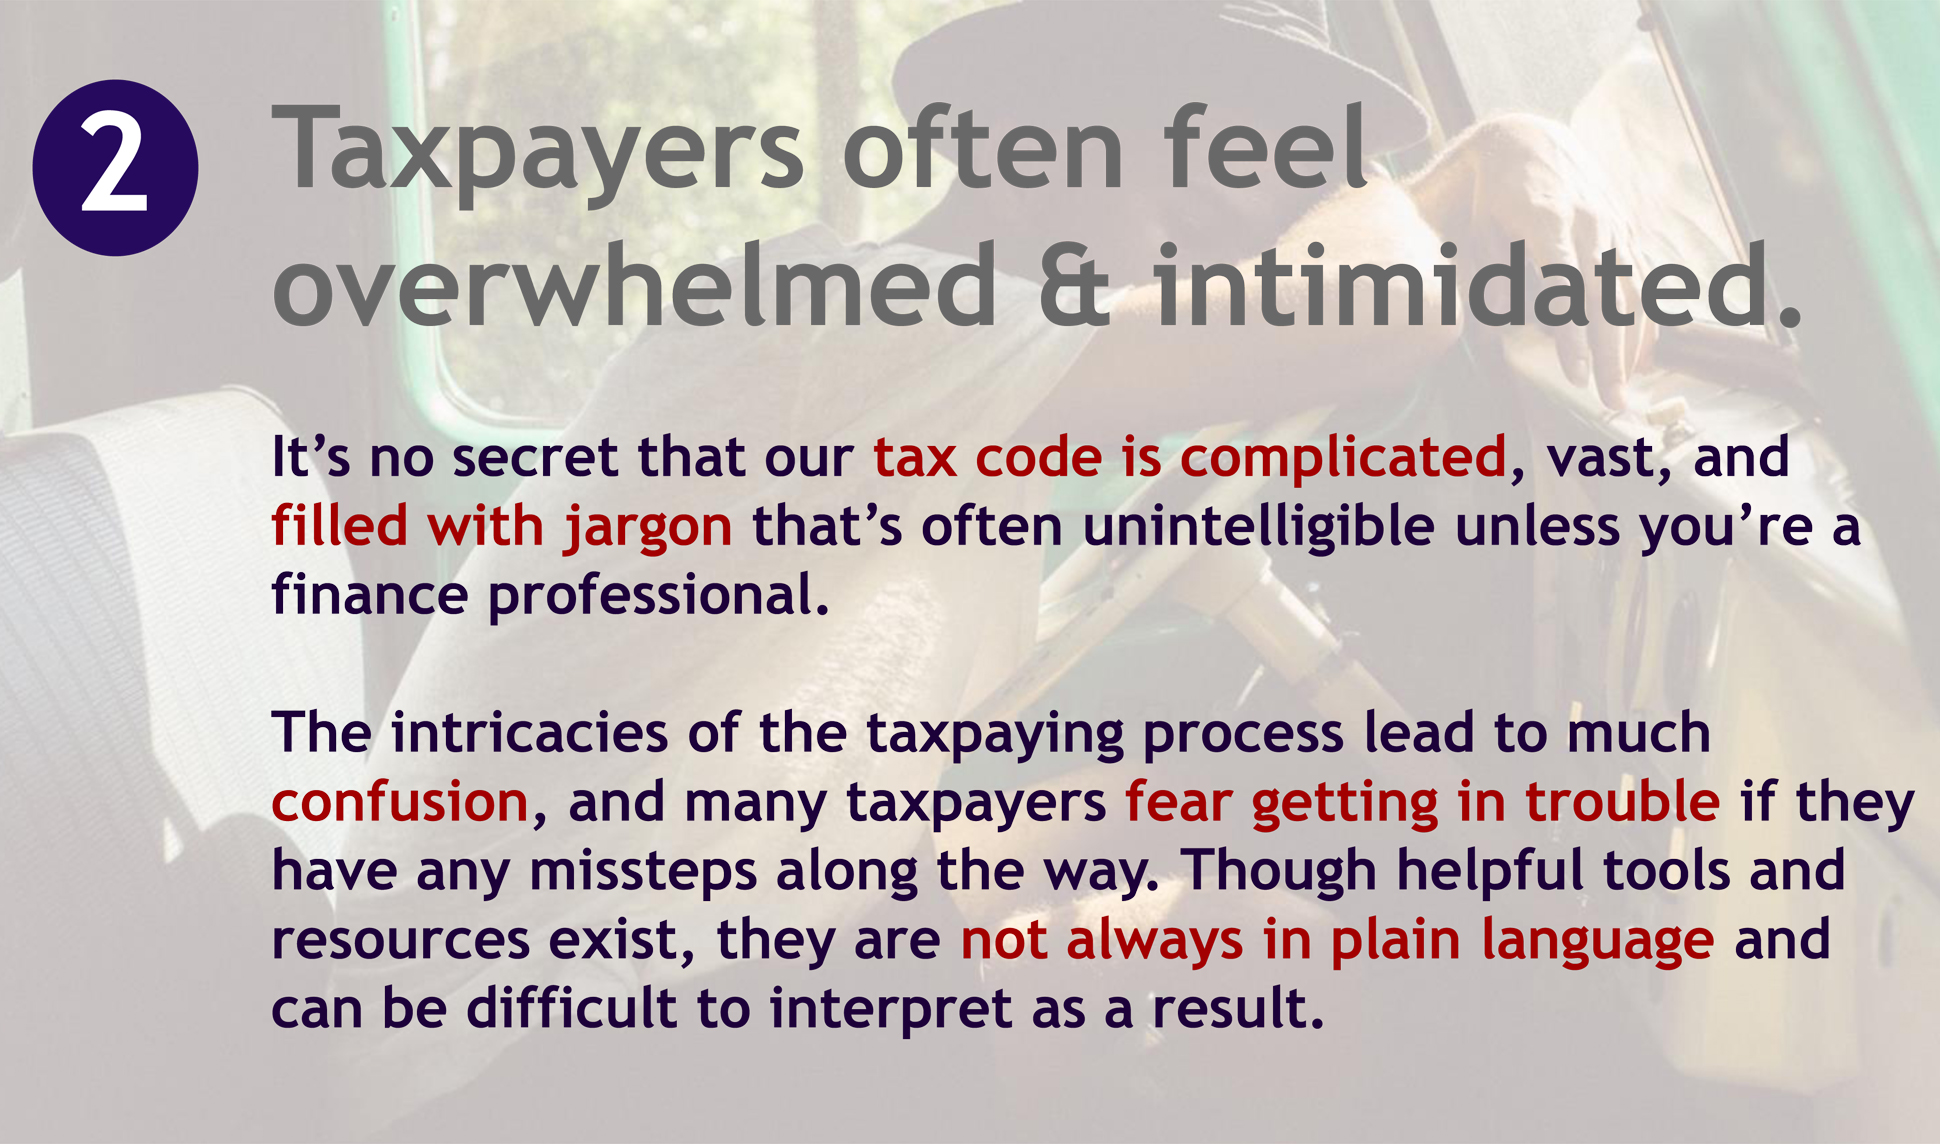 A page from a tax design challenge submission. A second reason people don’t like the IRS is provided by the submitter: “Taxpayers often feel overwhelmed and intimidated.”